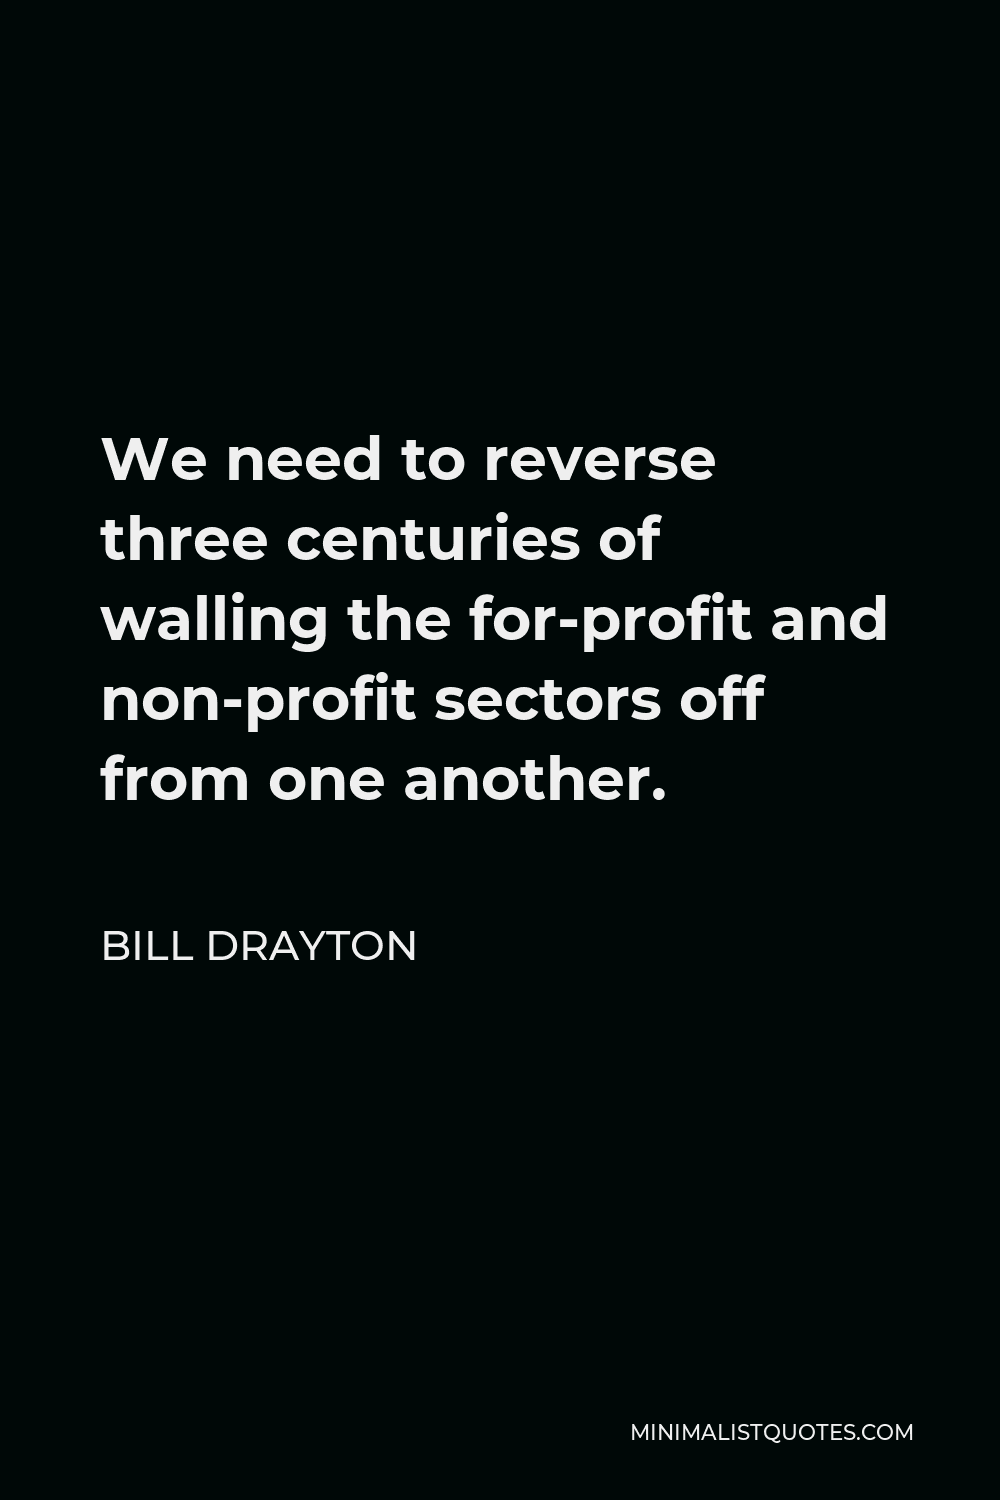 Bill Drayton Quote - We need to reverse three centuries of walling the for-profit and non-profit sectors off from one another.